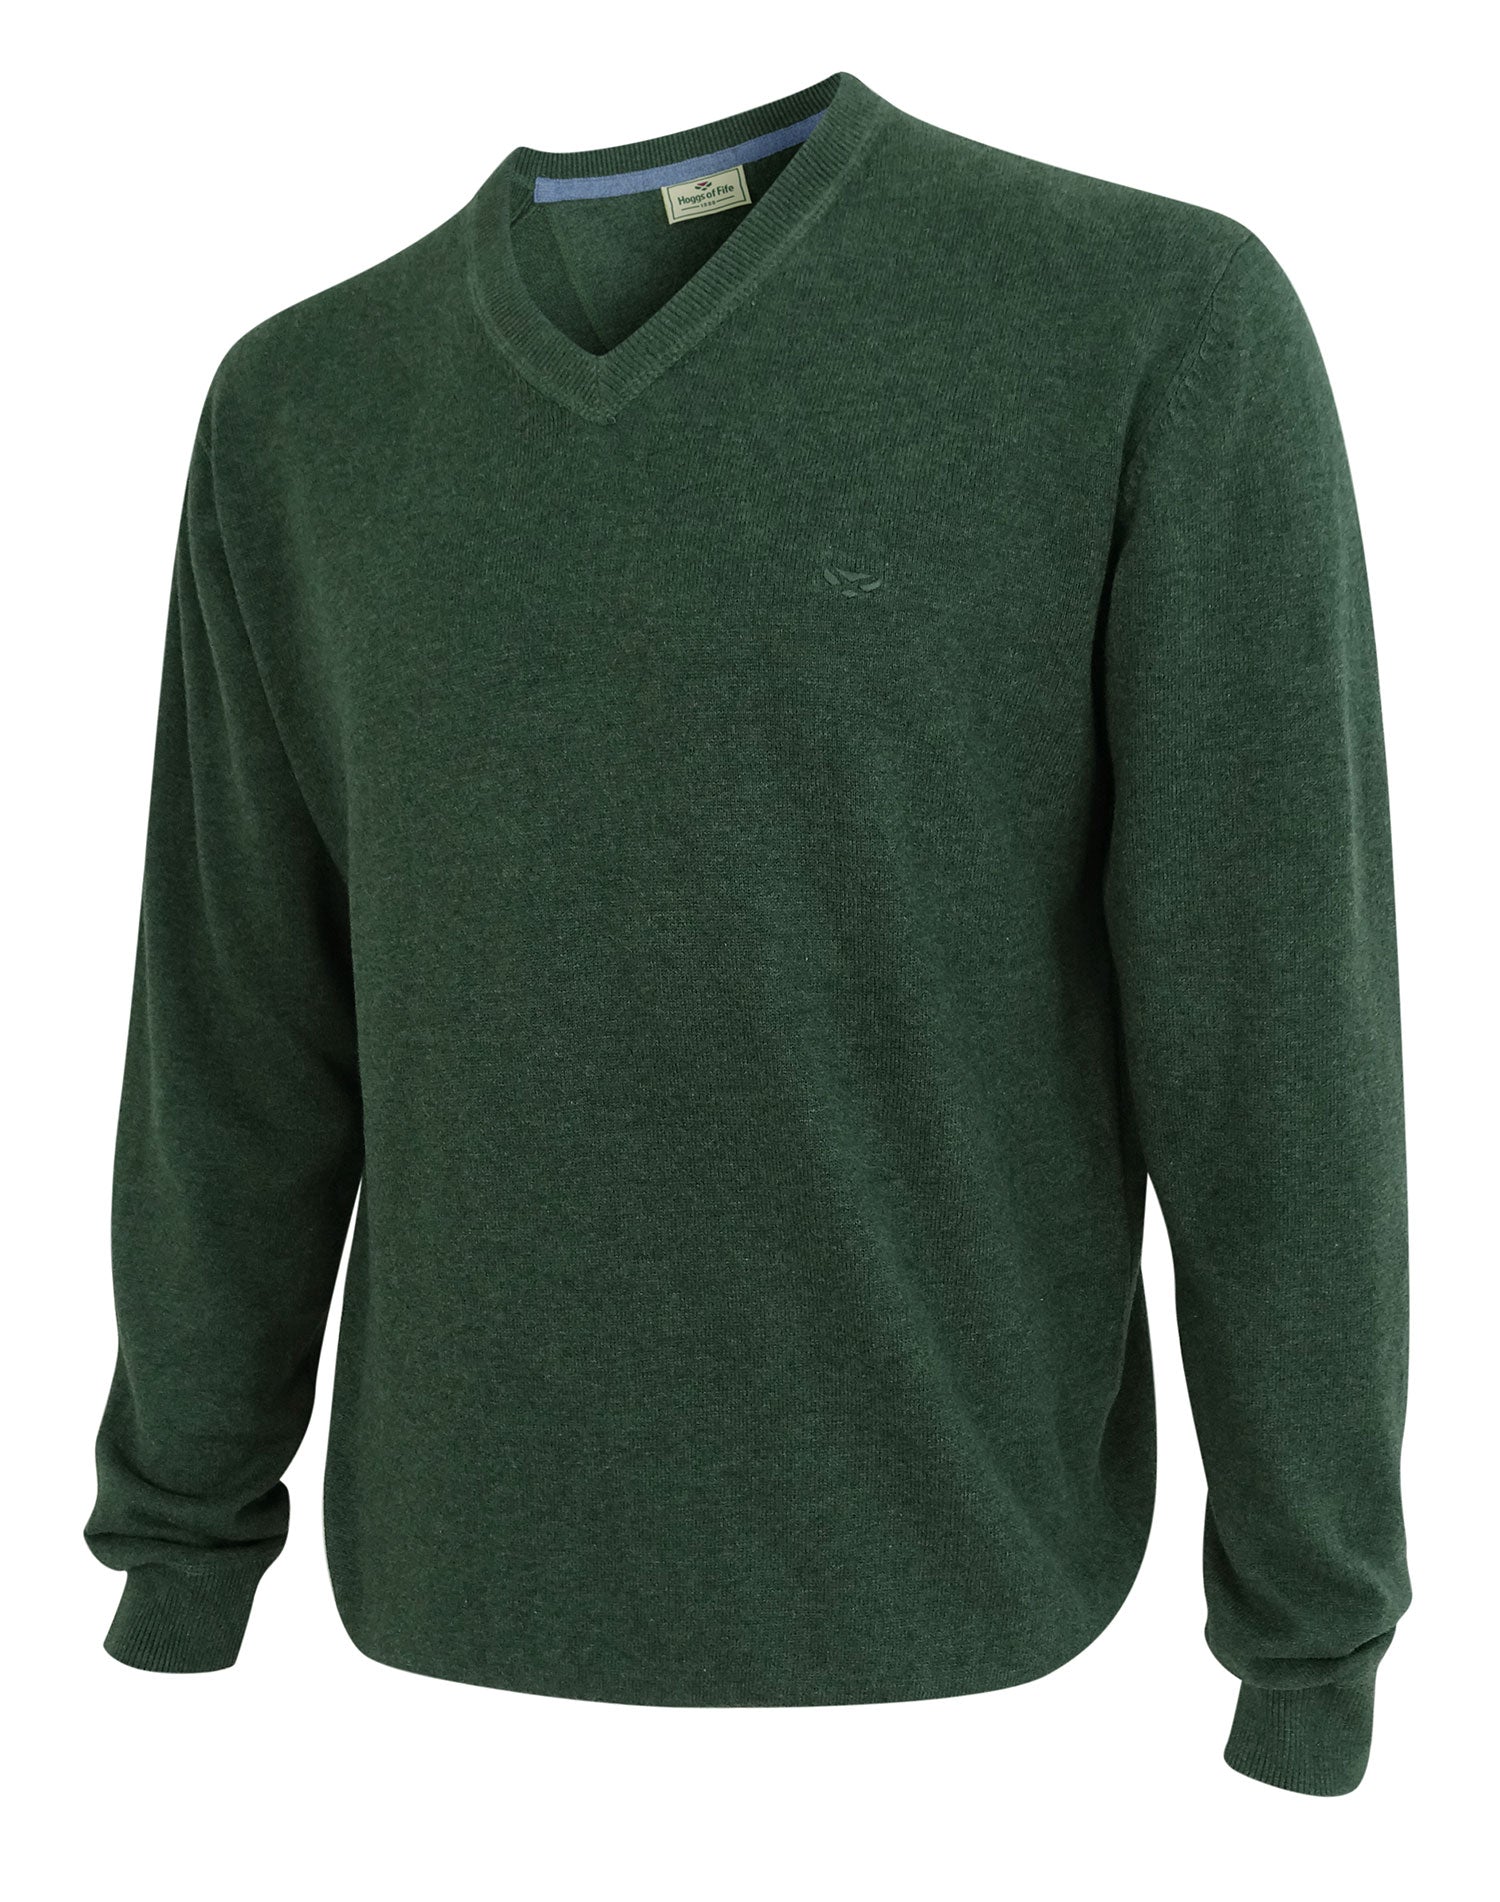 Stirling V Neck Cotton Sweater by Hoggs of Fife 